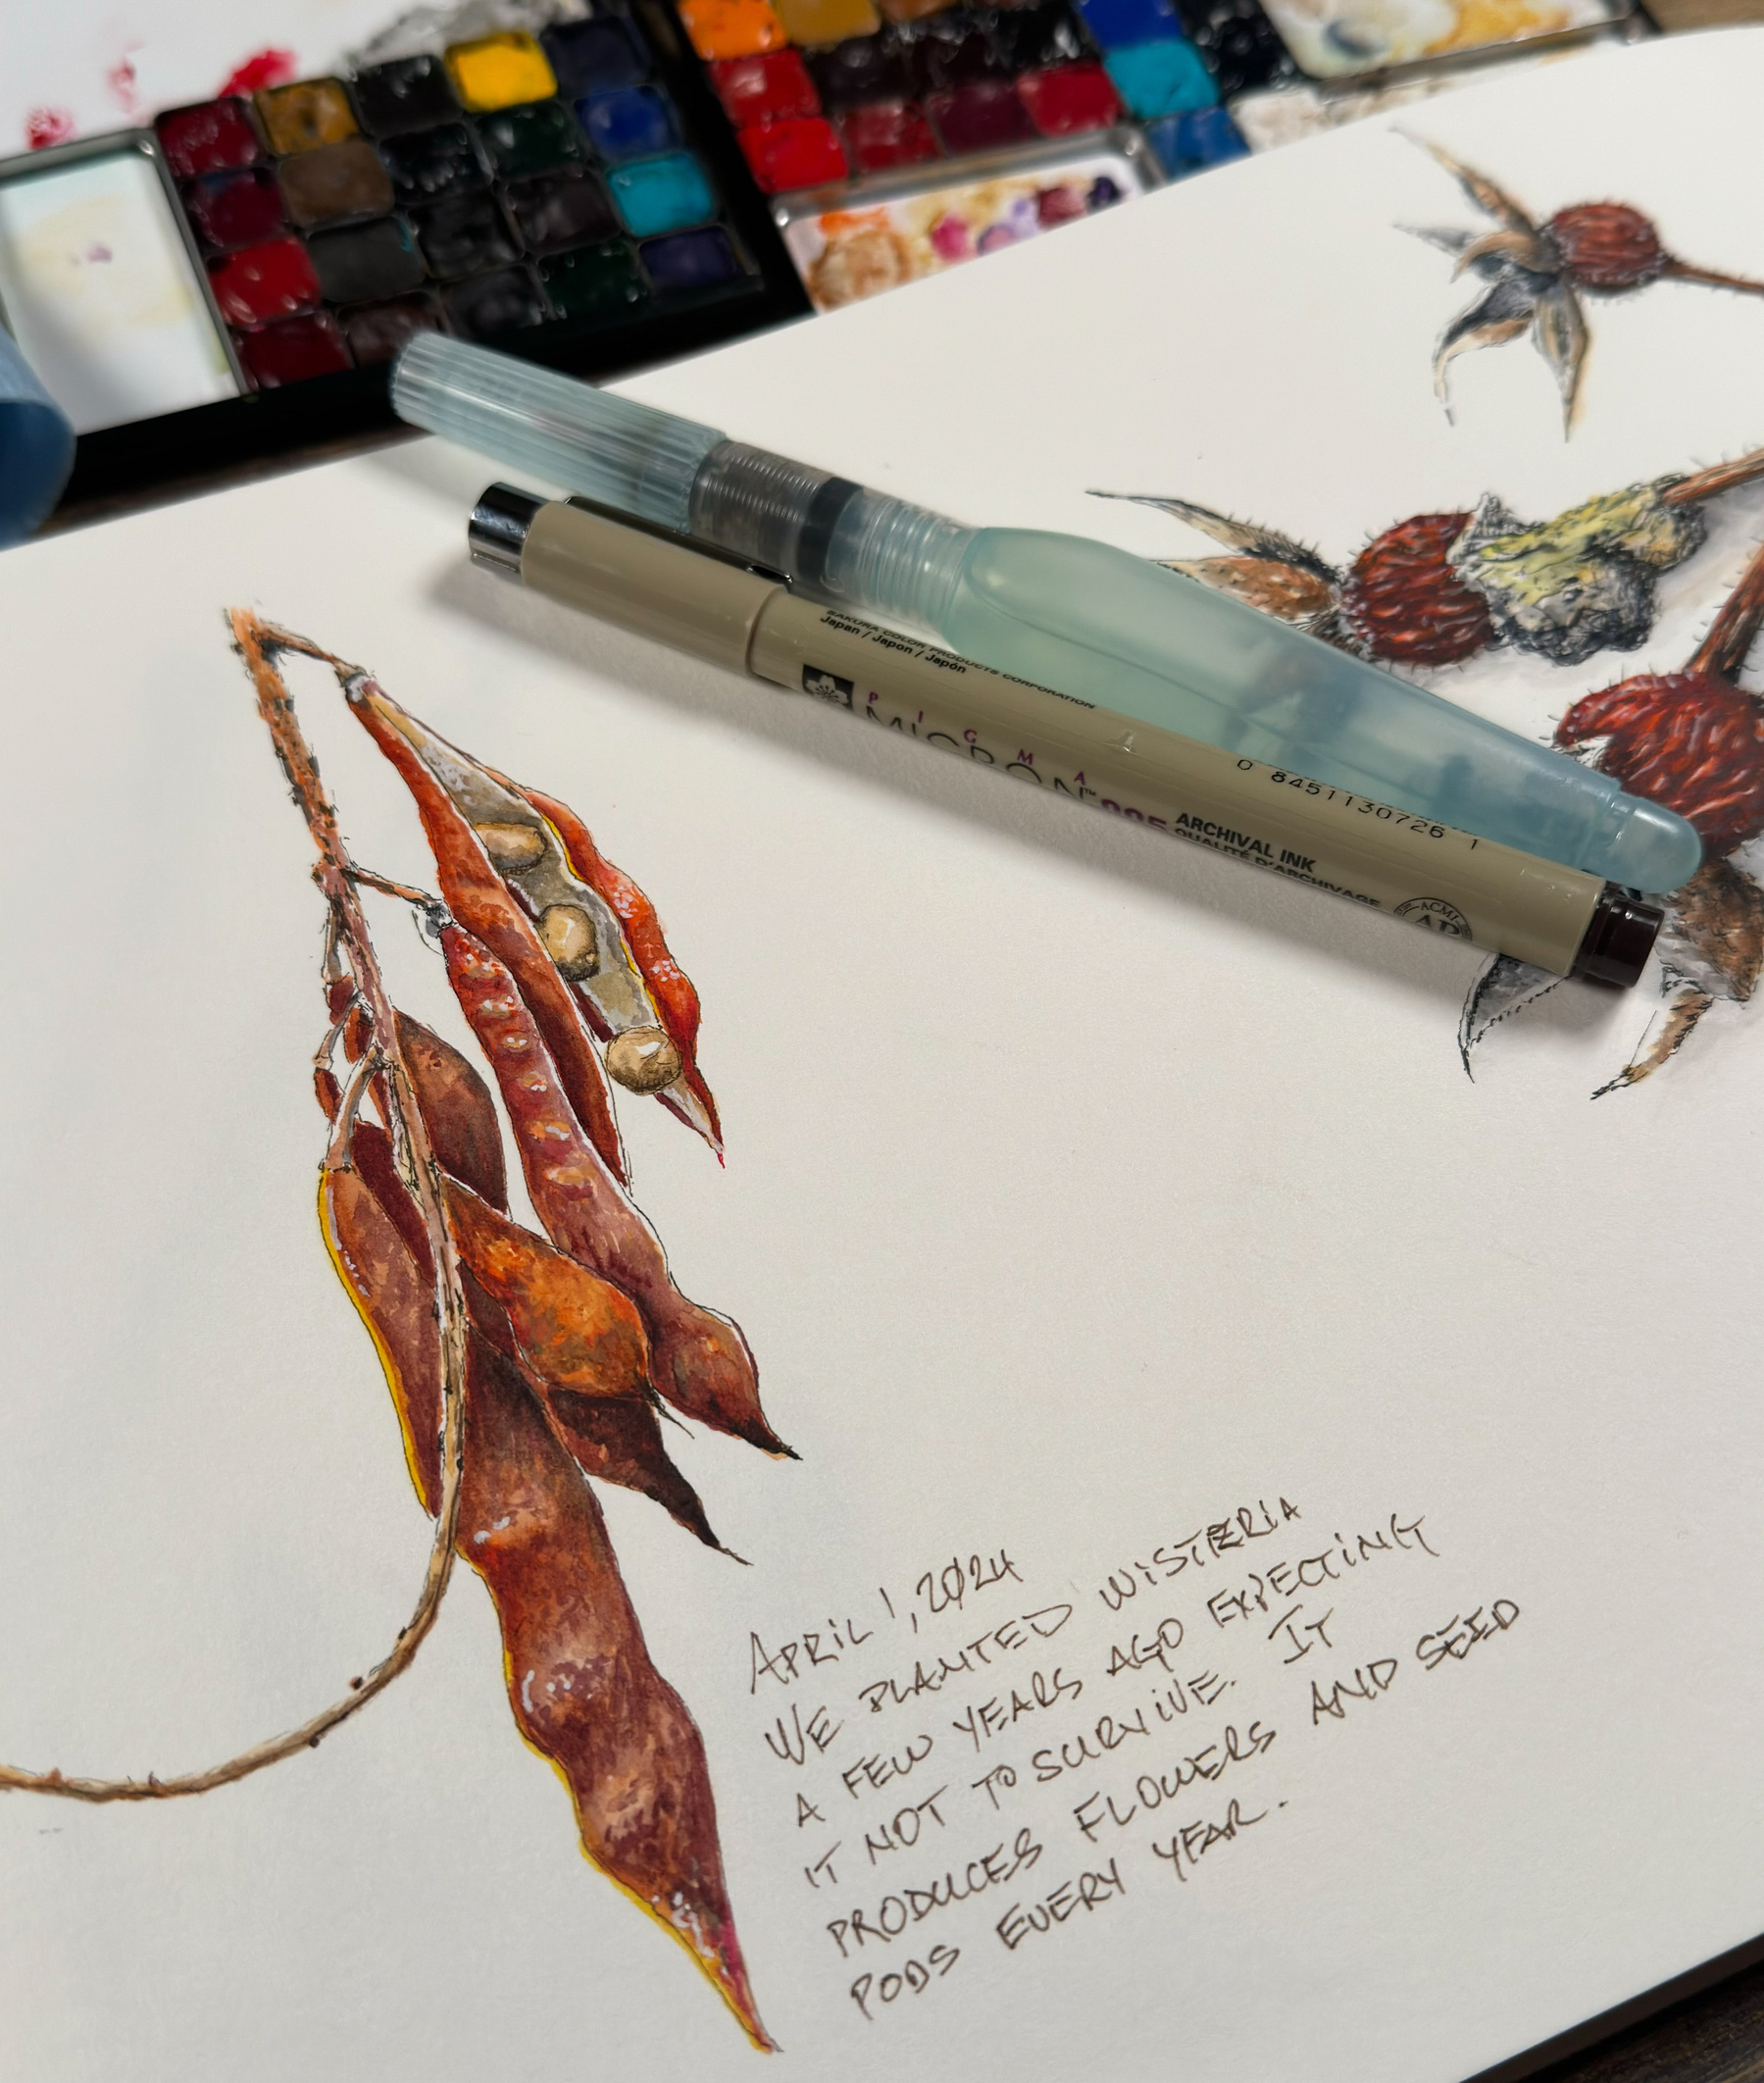 This image displays an artist’s desk with a watercolor sketch of a wisteria seed pod. On the top left, there is a palette of watercolors, and on the right side, a brush pen and an archival ink pen lay across the paper. Below the sketch, there is handwritten text detailing the plant’s growth, dated April 1 2024.&10;